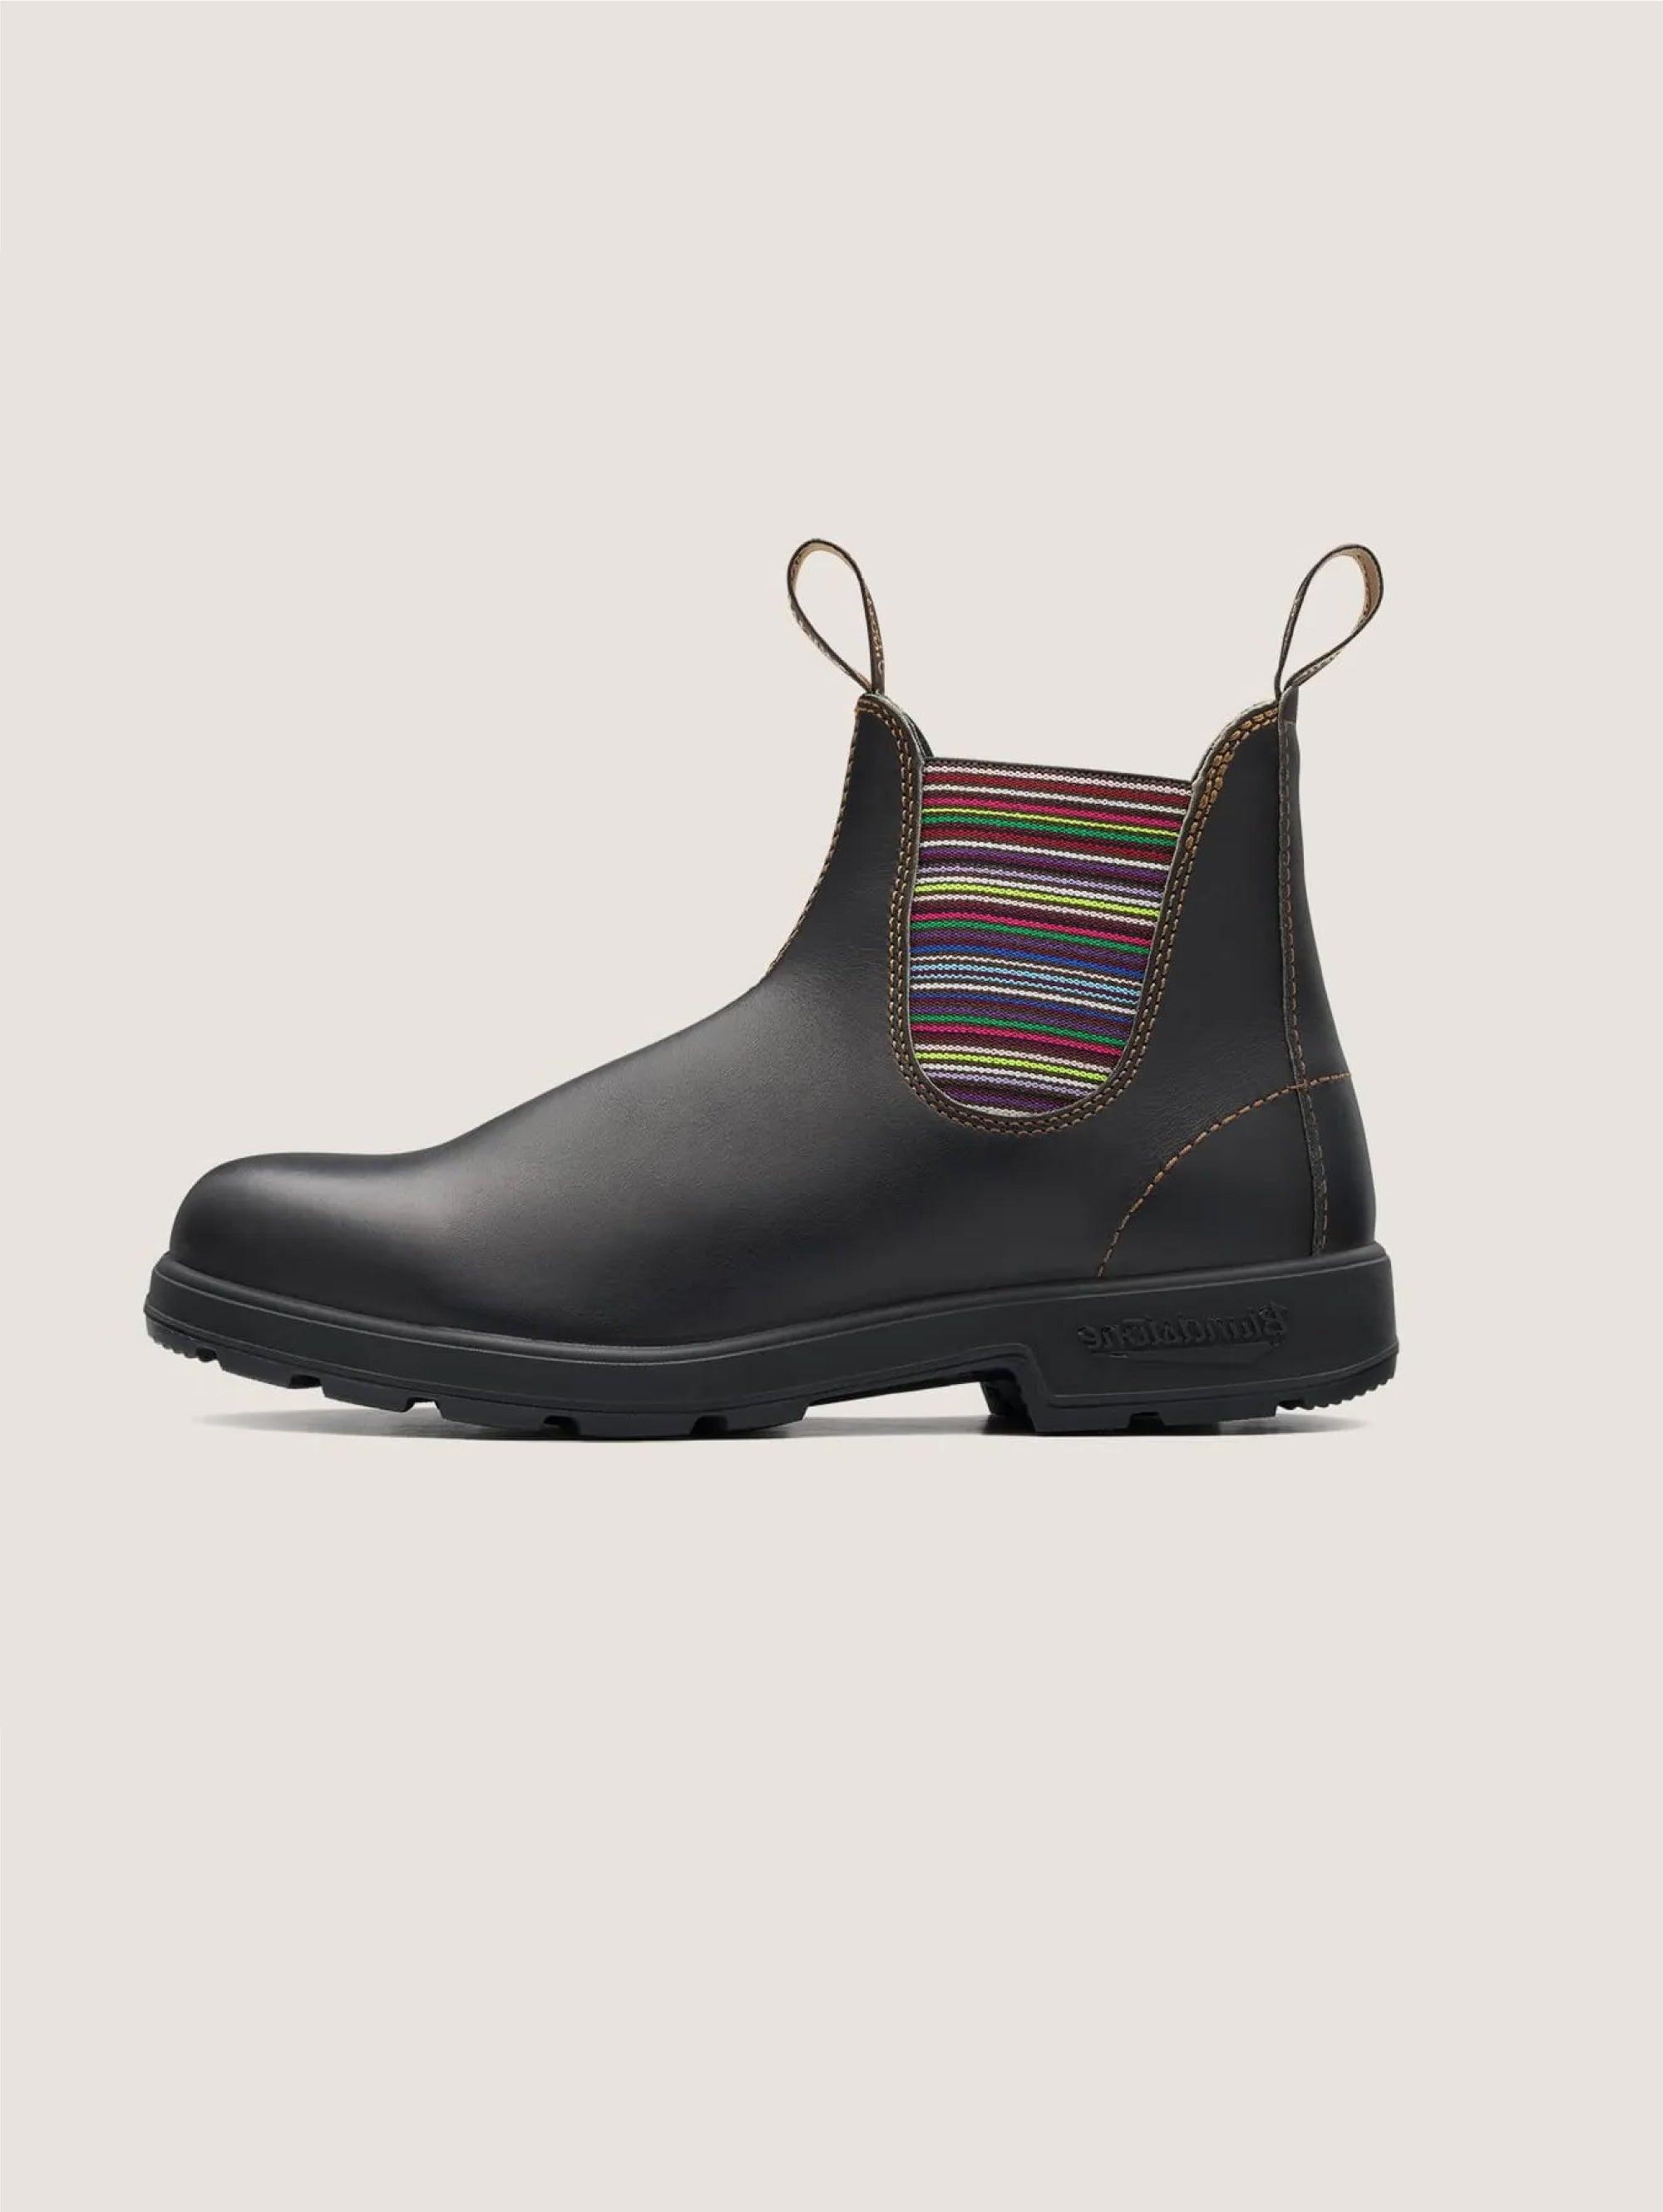 Blundstone Chelsea Boots With Brown Striped Elastics in Black | Lyst